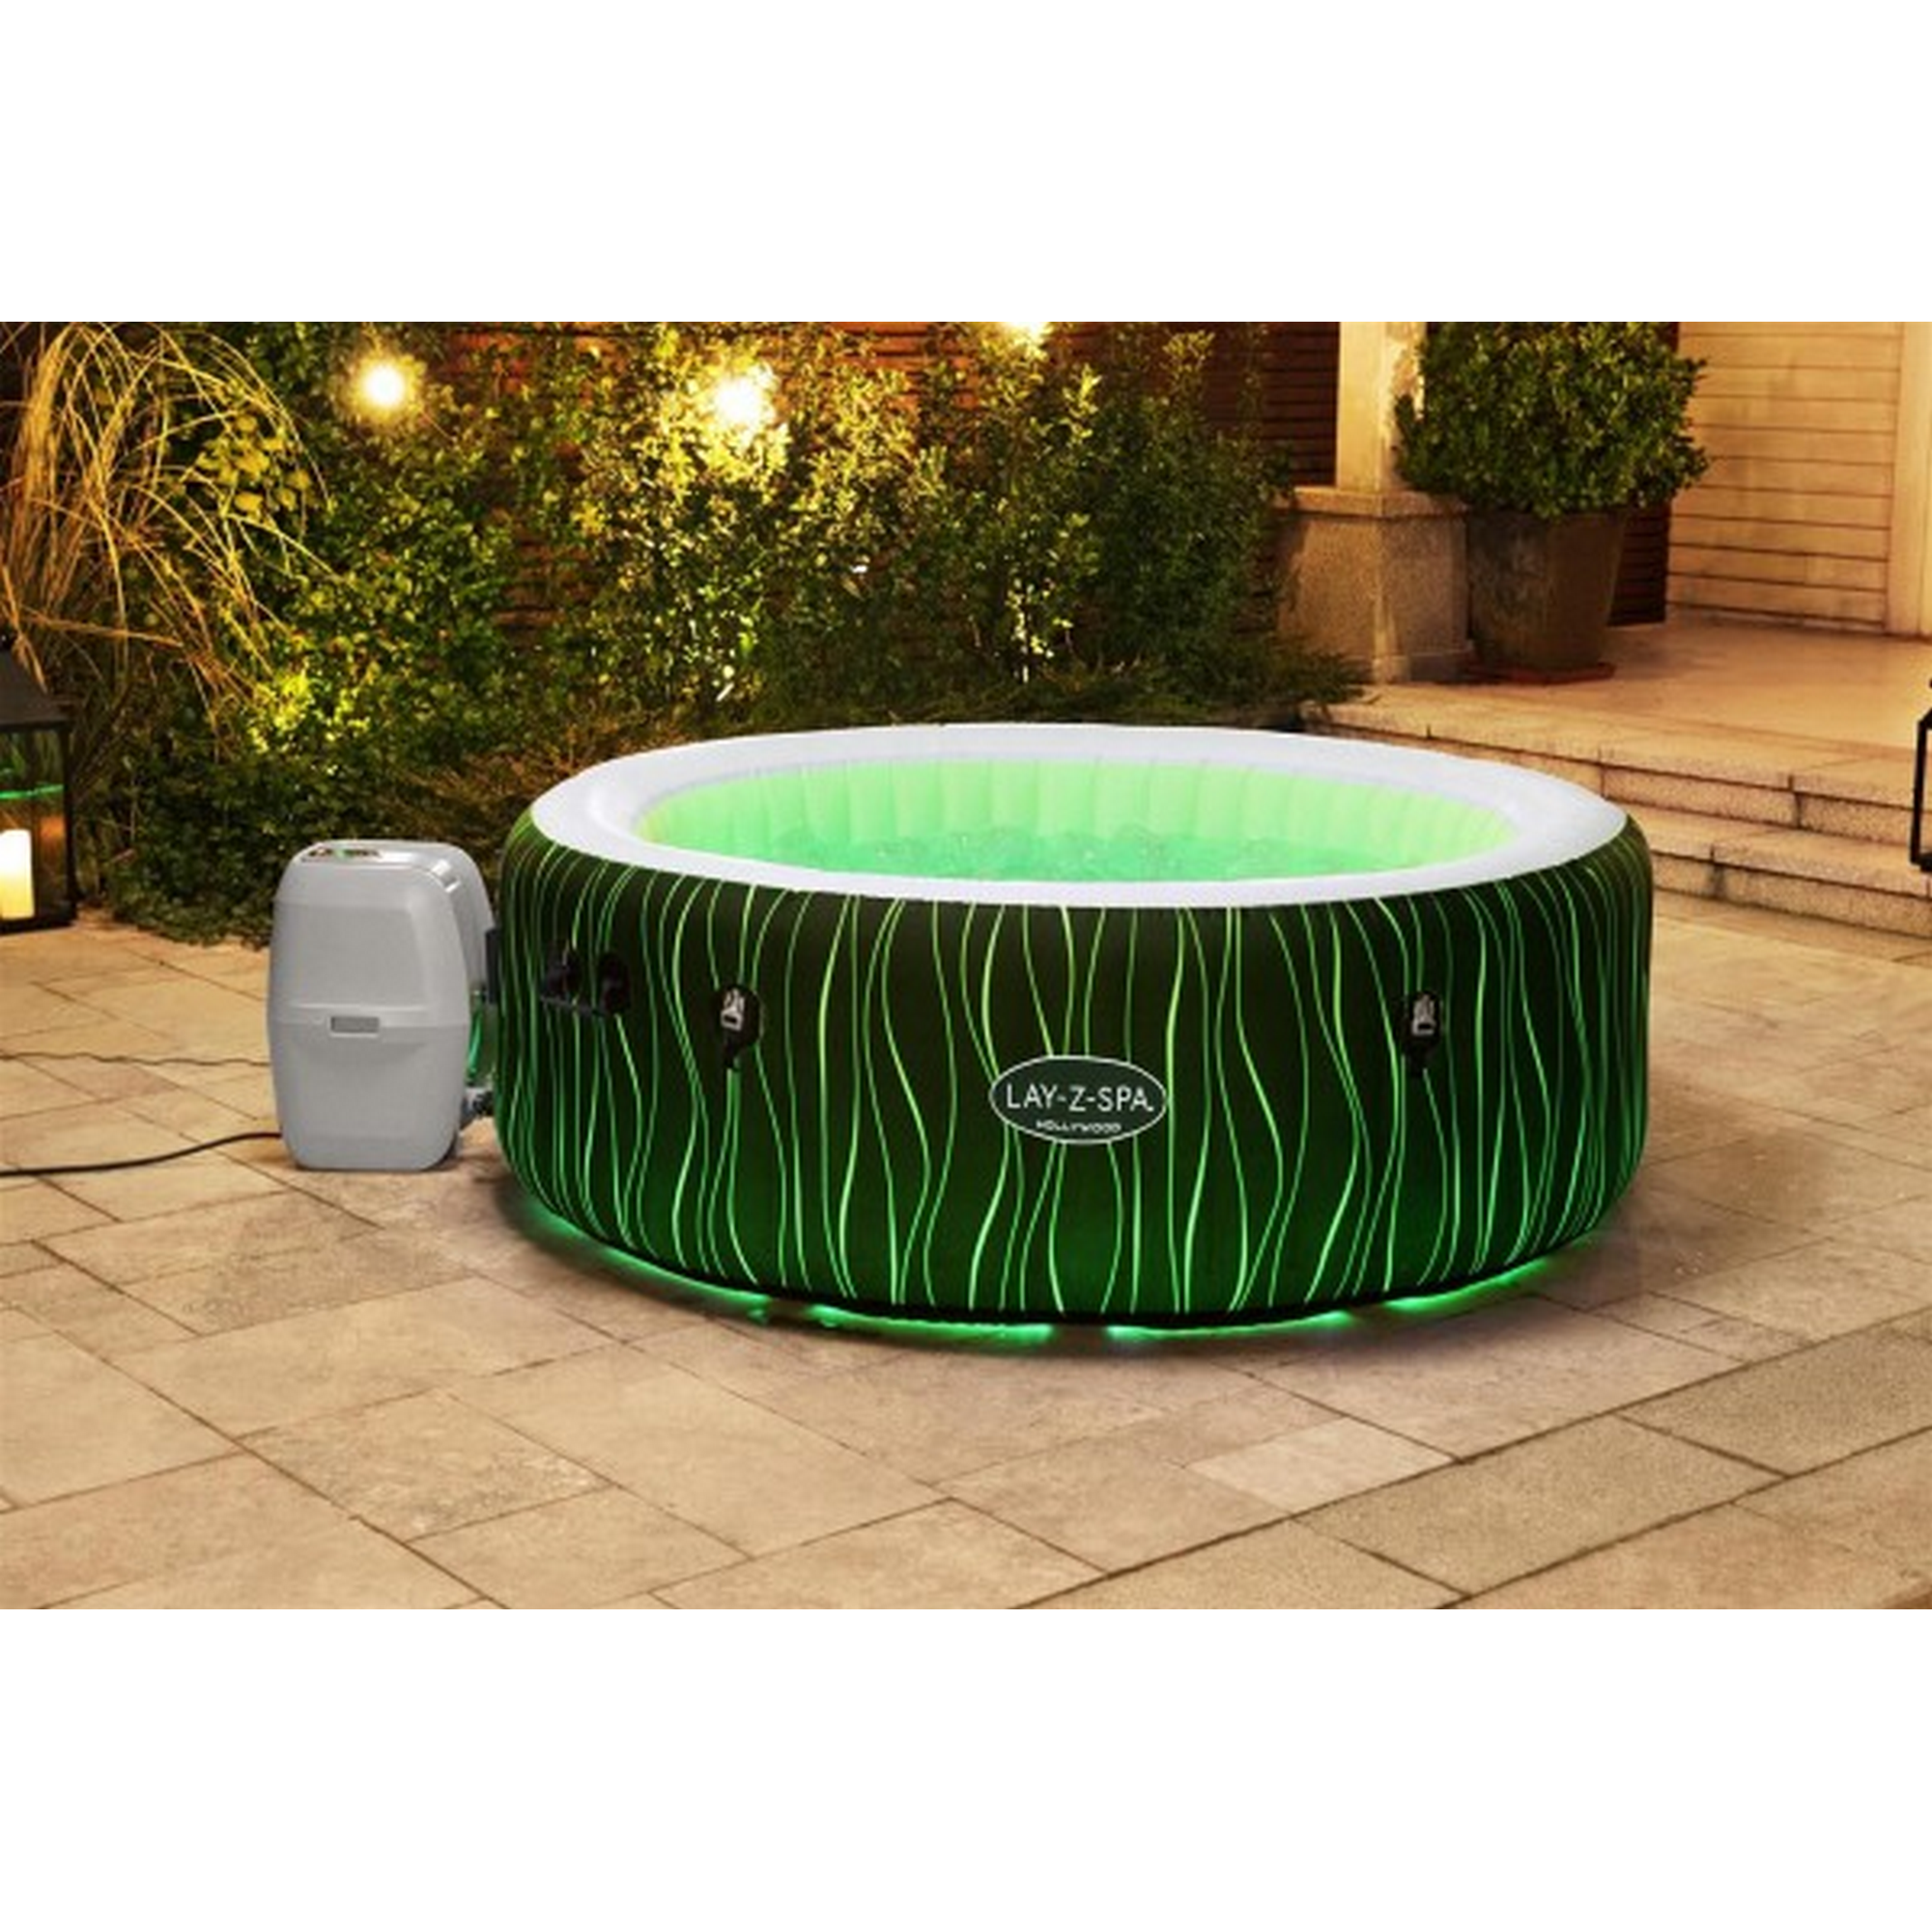 Whirlpool 'LAY-Z-SPA®Hollywood AirJet™' schwarz Ø 196 x 66 cm, mit LED + product picture